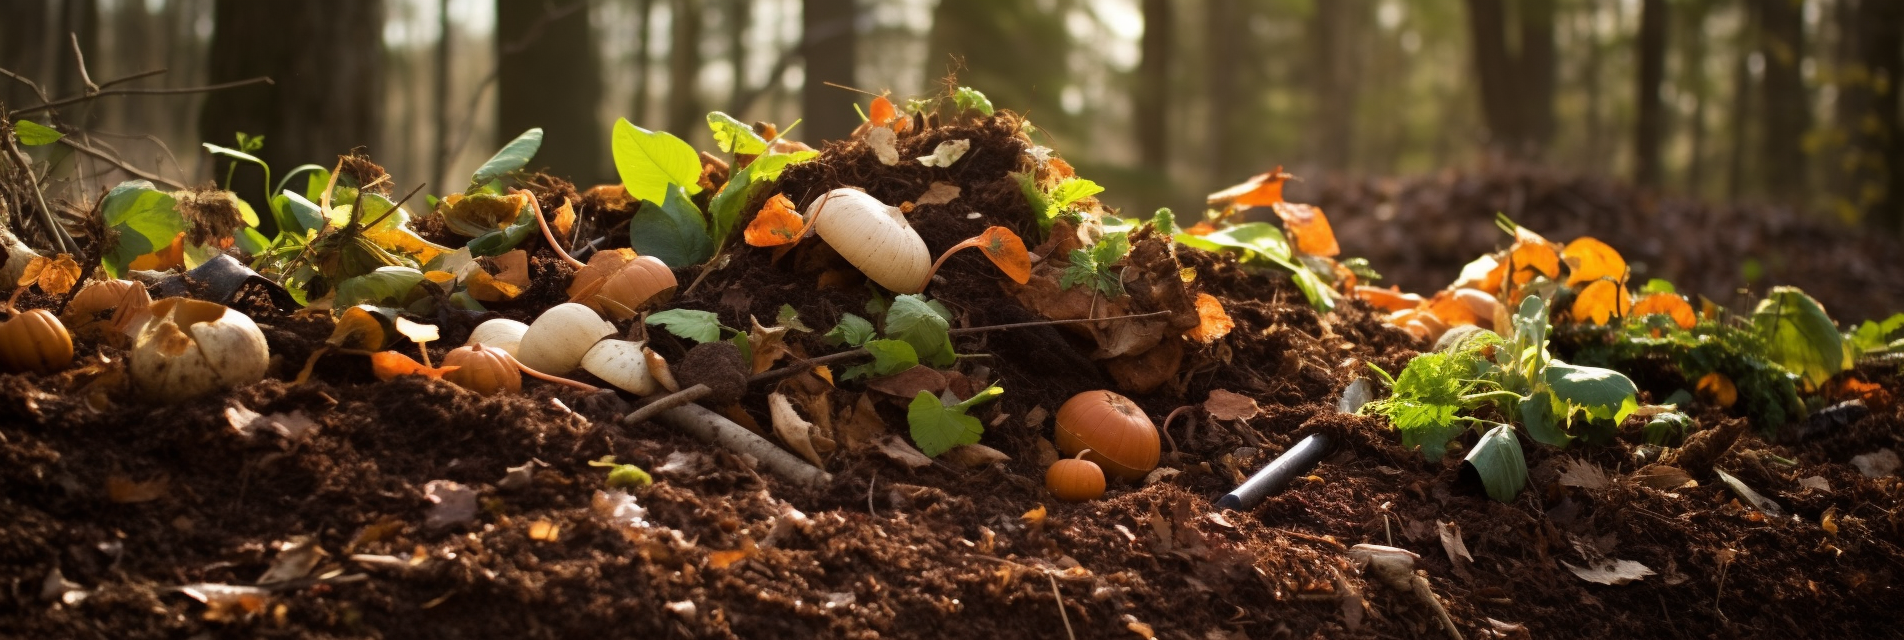 4 Reasons You Have to Love Composting